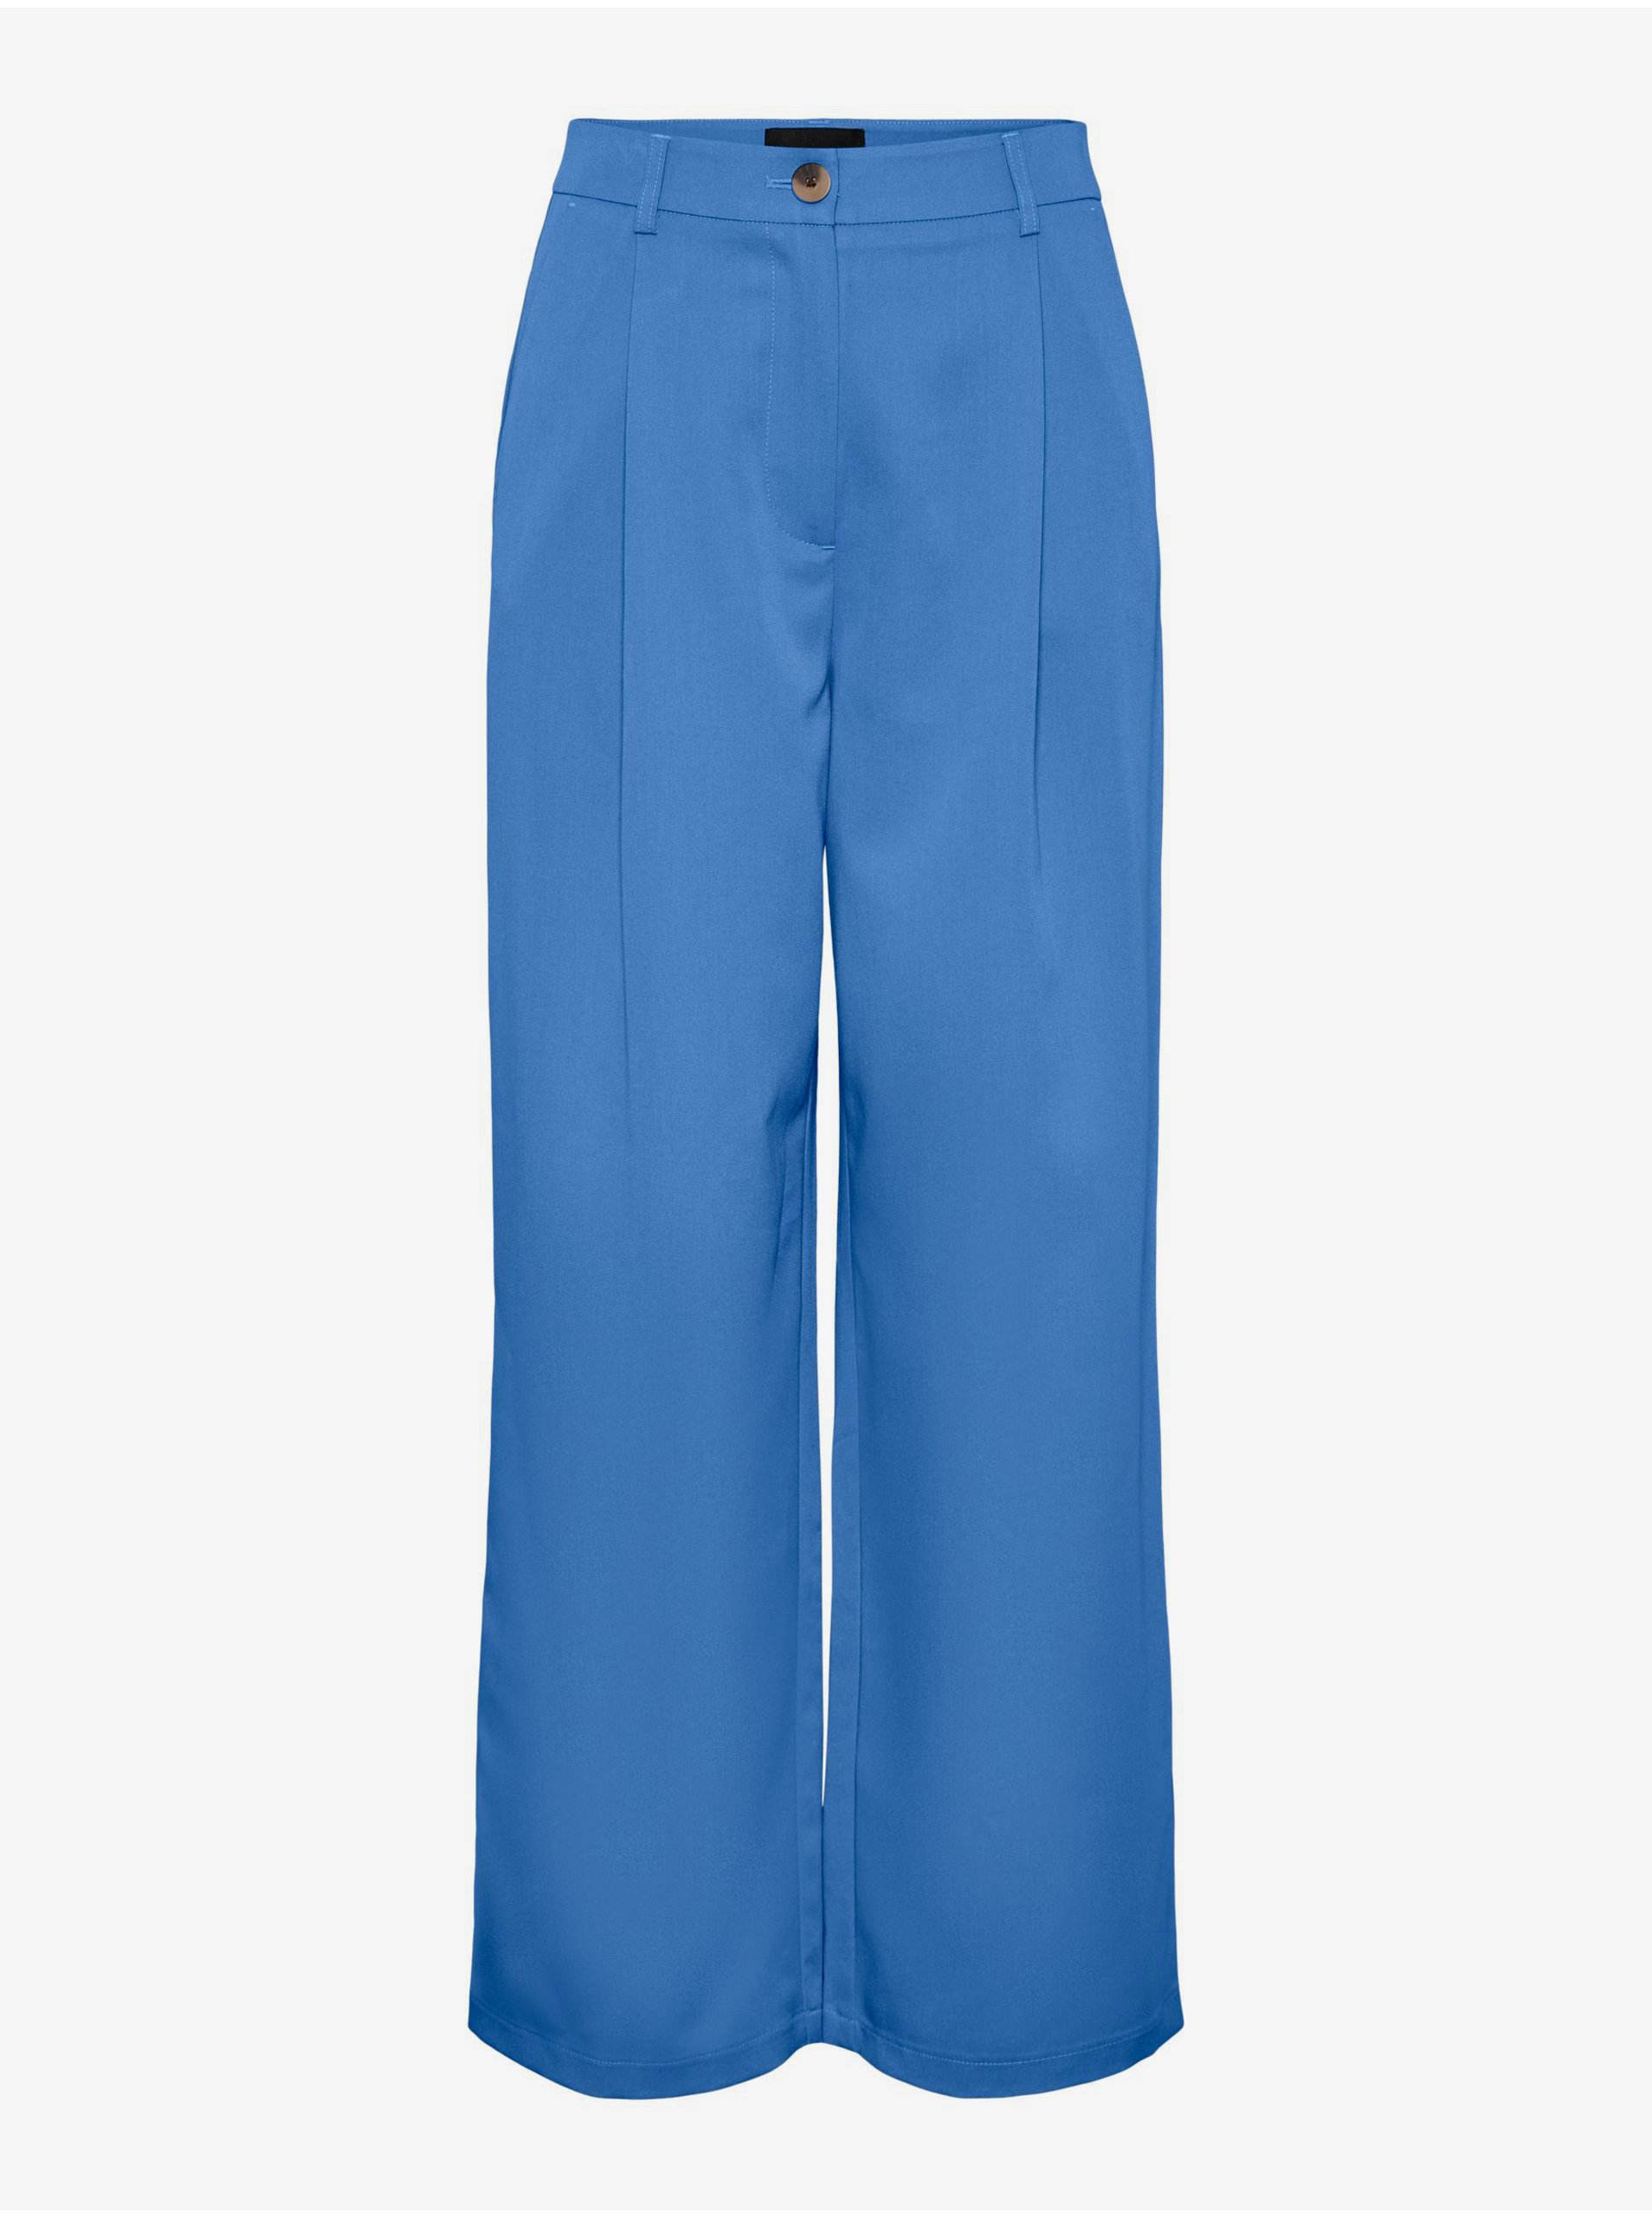 Women's Blue Wide Trousers Pieces Thelma - Women's